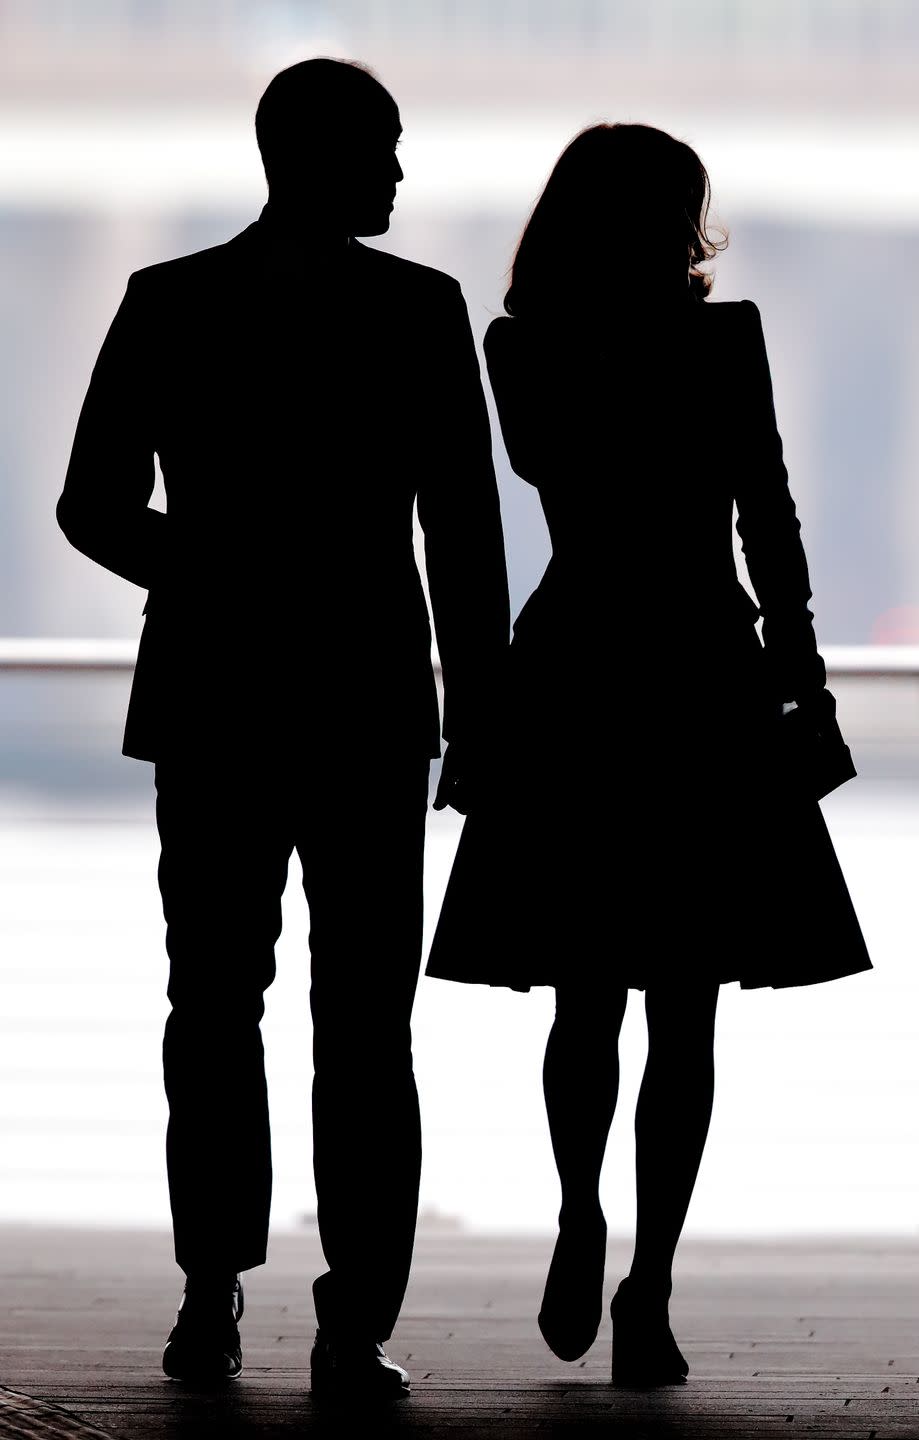 <p>This dramatic silhouette shows the Duke and Duchess of Cambridge, who are known as the Duke and Duchess of Strathearn in Scotland, at the opening of the Dundee, Scotland's first design museum.</p>